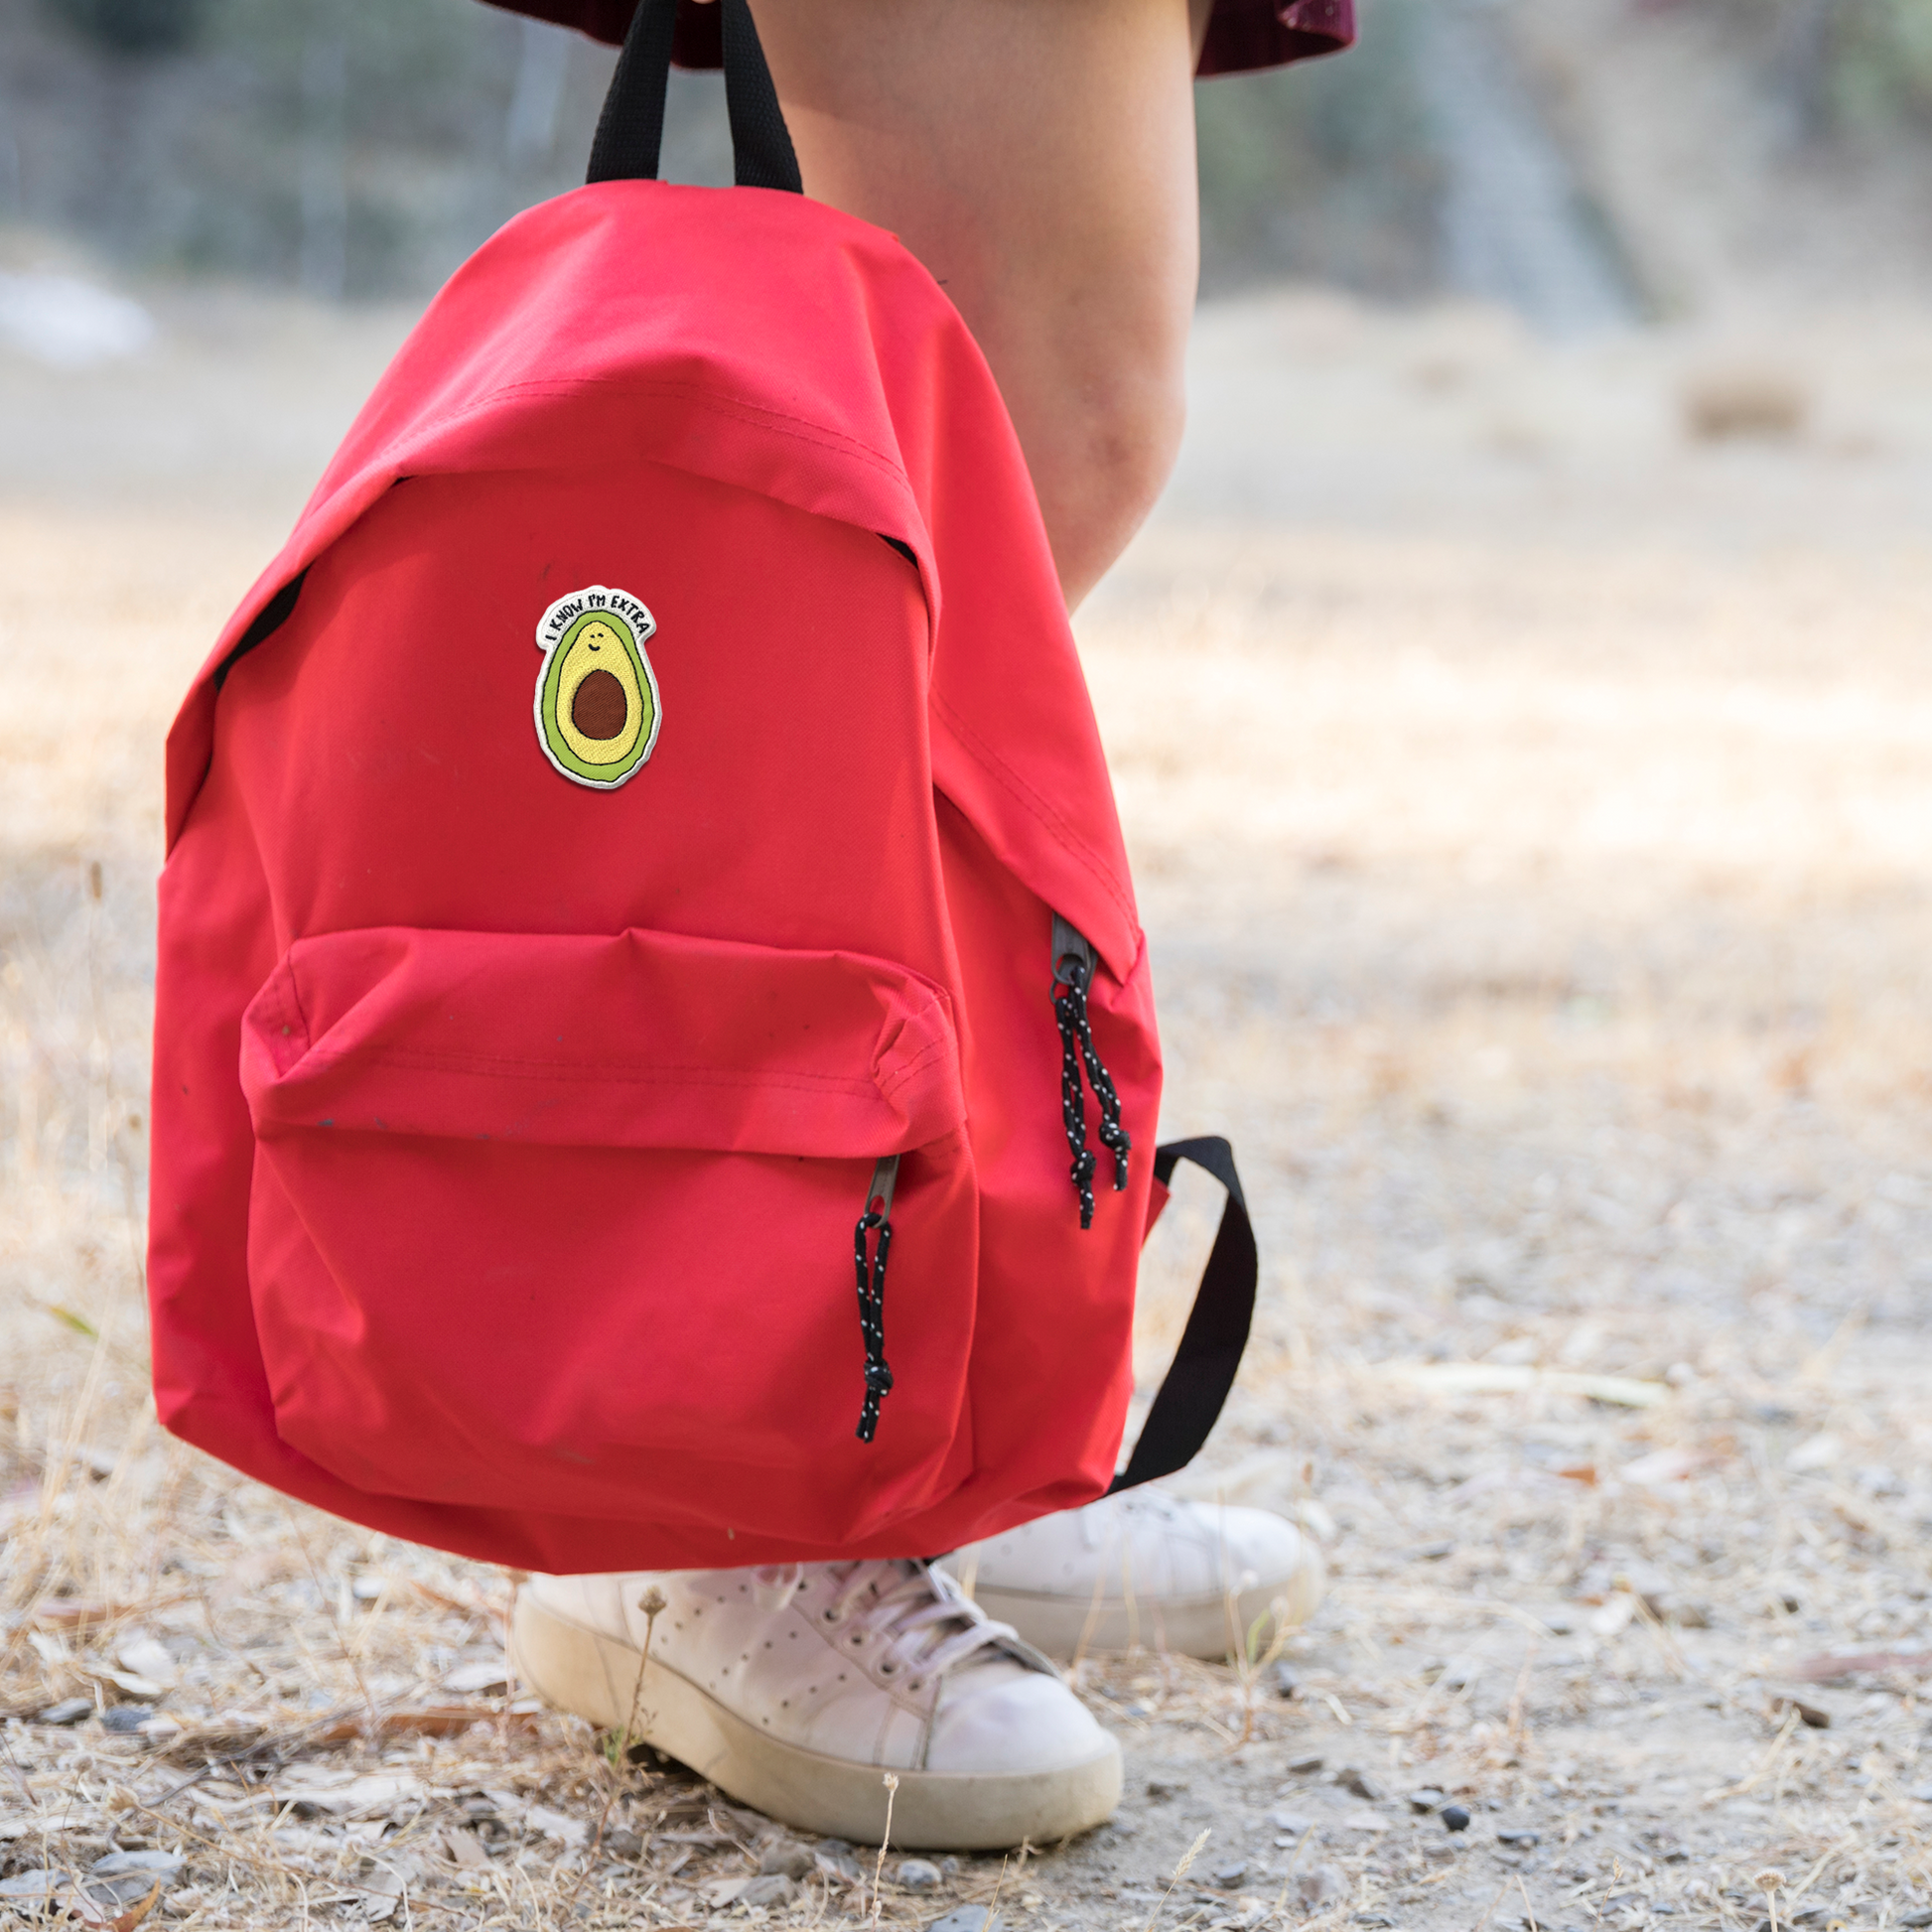 A girl wearing a red backpack with the "I Know Im Extra" patch by rockdoodles, featuring an acorn embroidered on it.